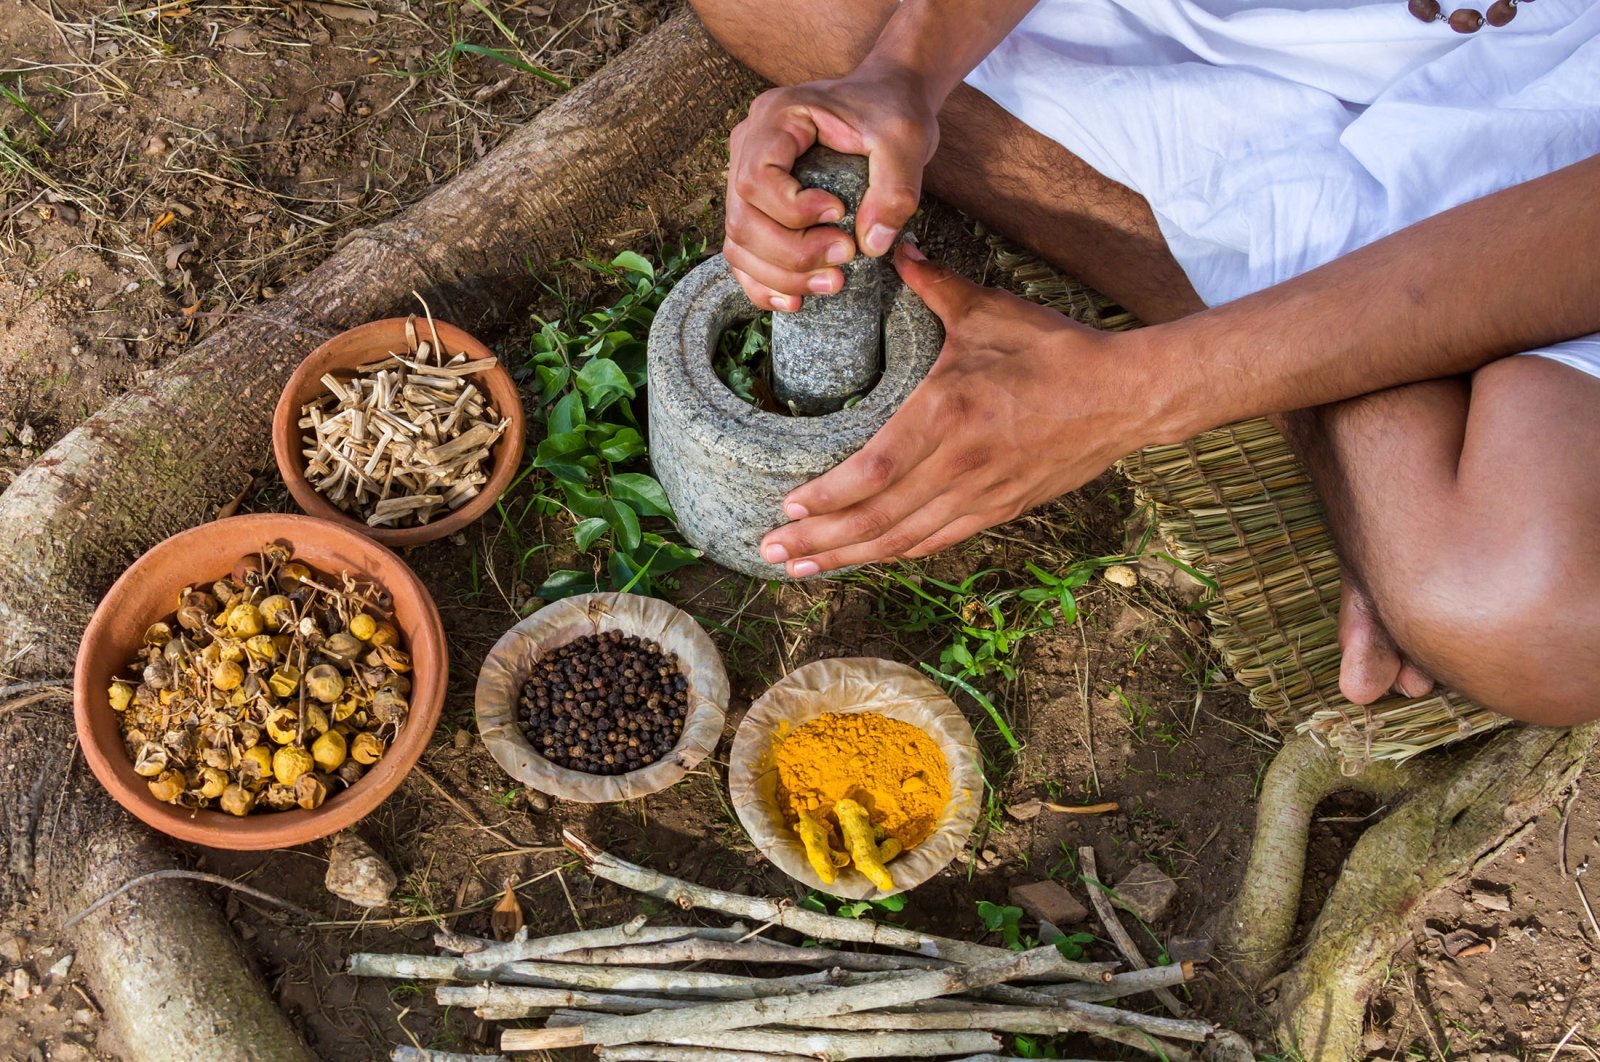 Foremost leaders and experts in Ayurvedic medicine, a holistic healing system that has been prevalent in India, are set to gather in Türkiye. (Shutterstock Photo)